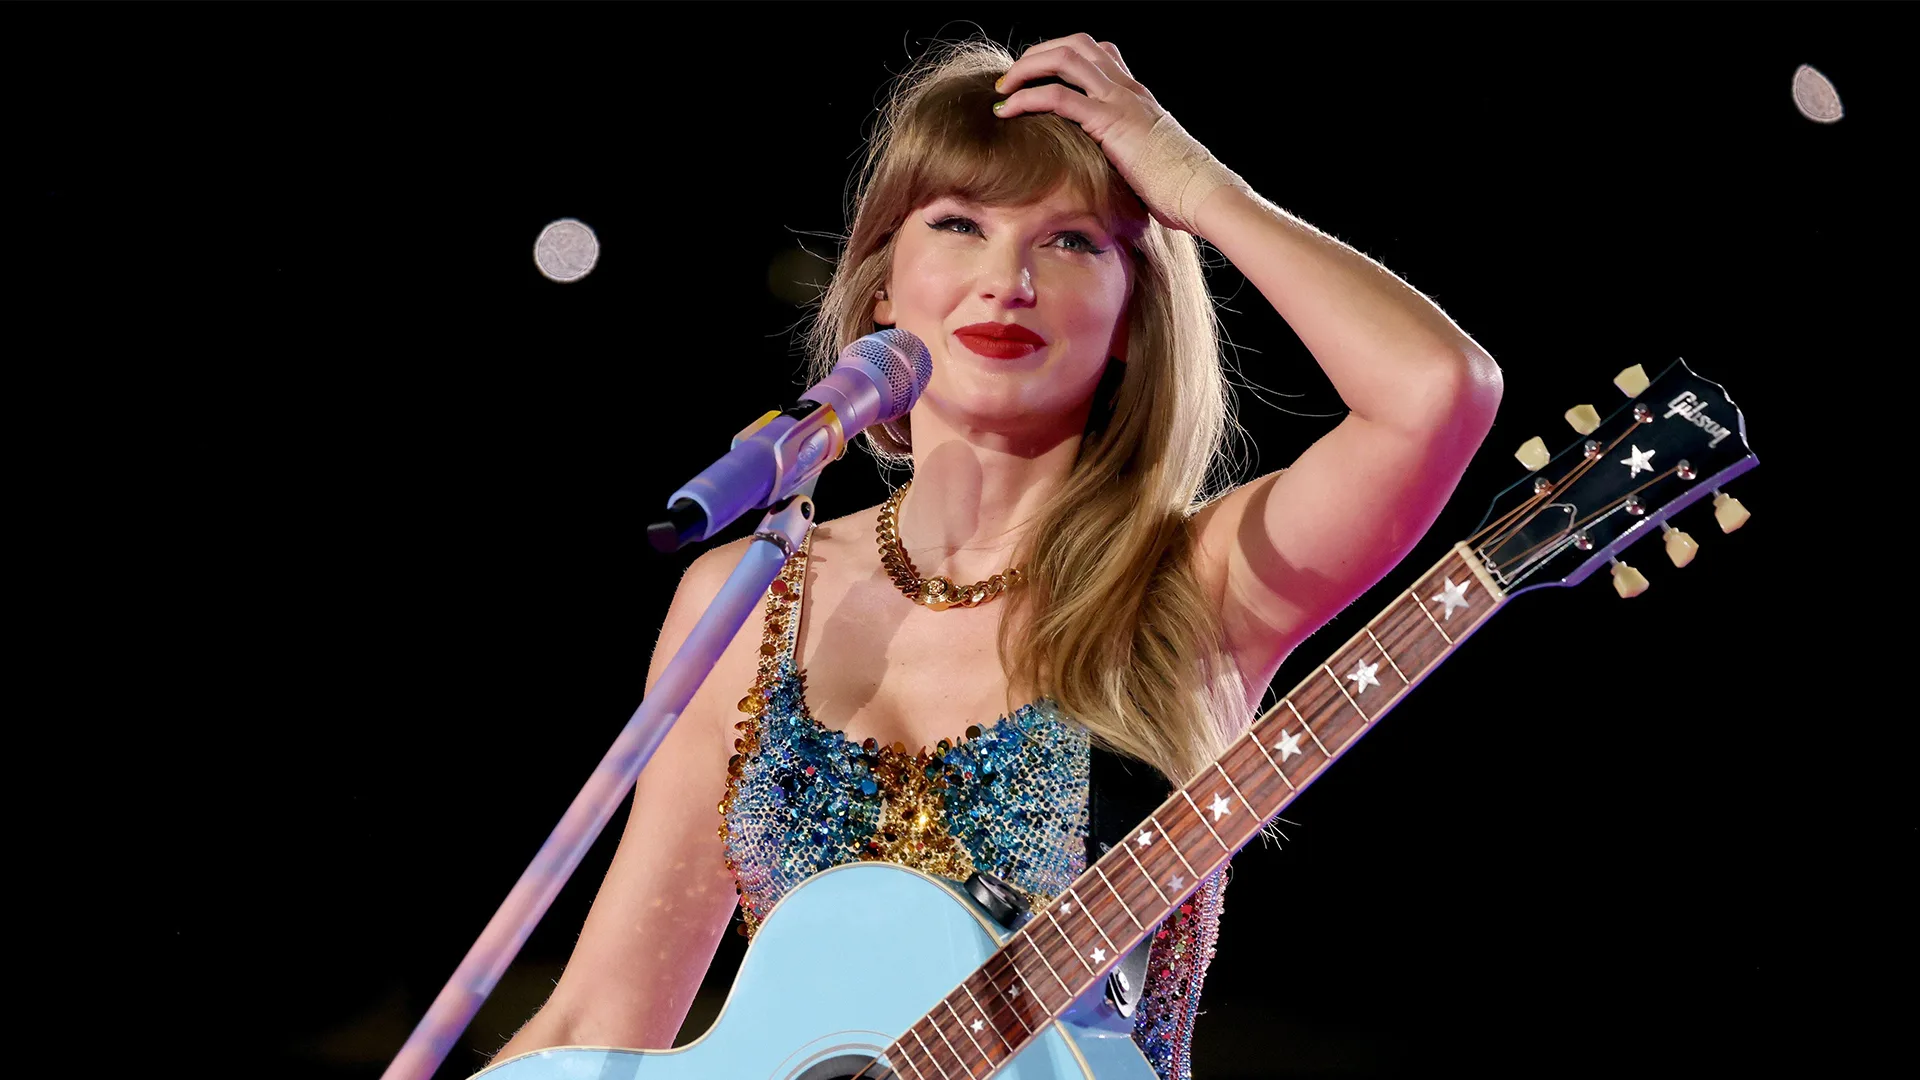 Taylor Swift smiling with blue guitar against a black background